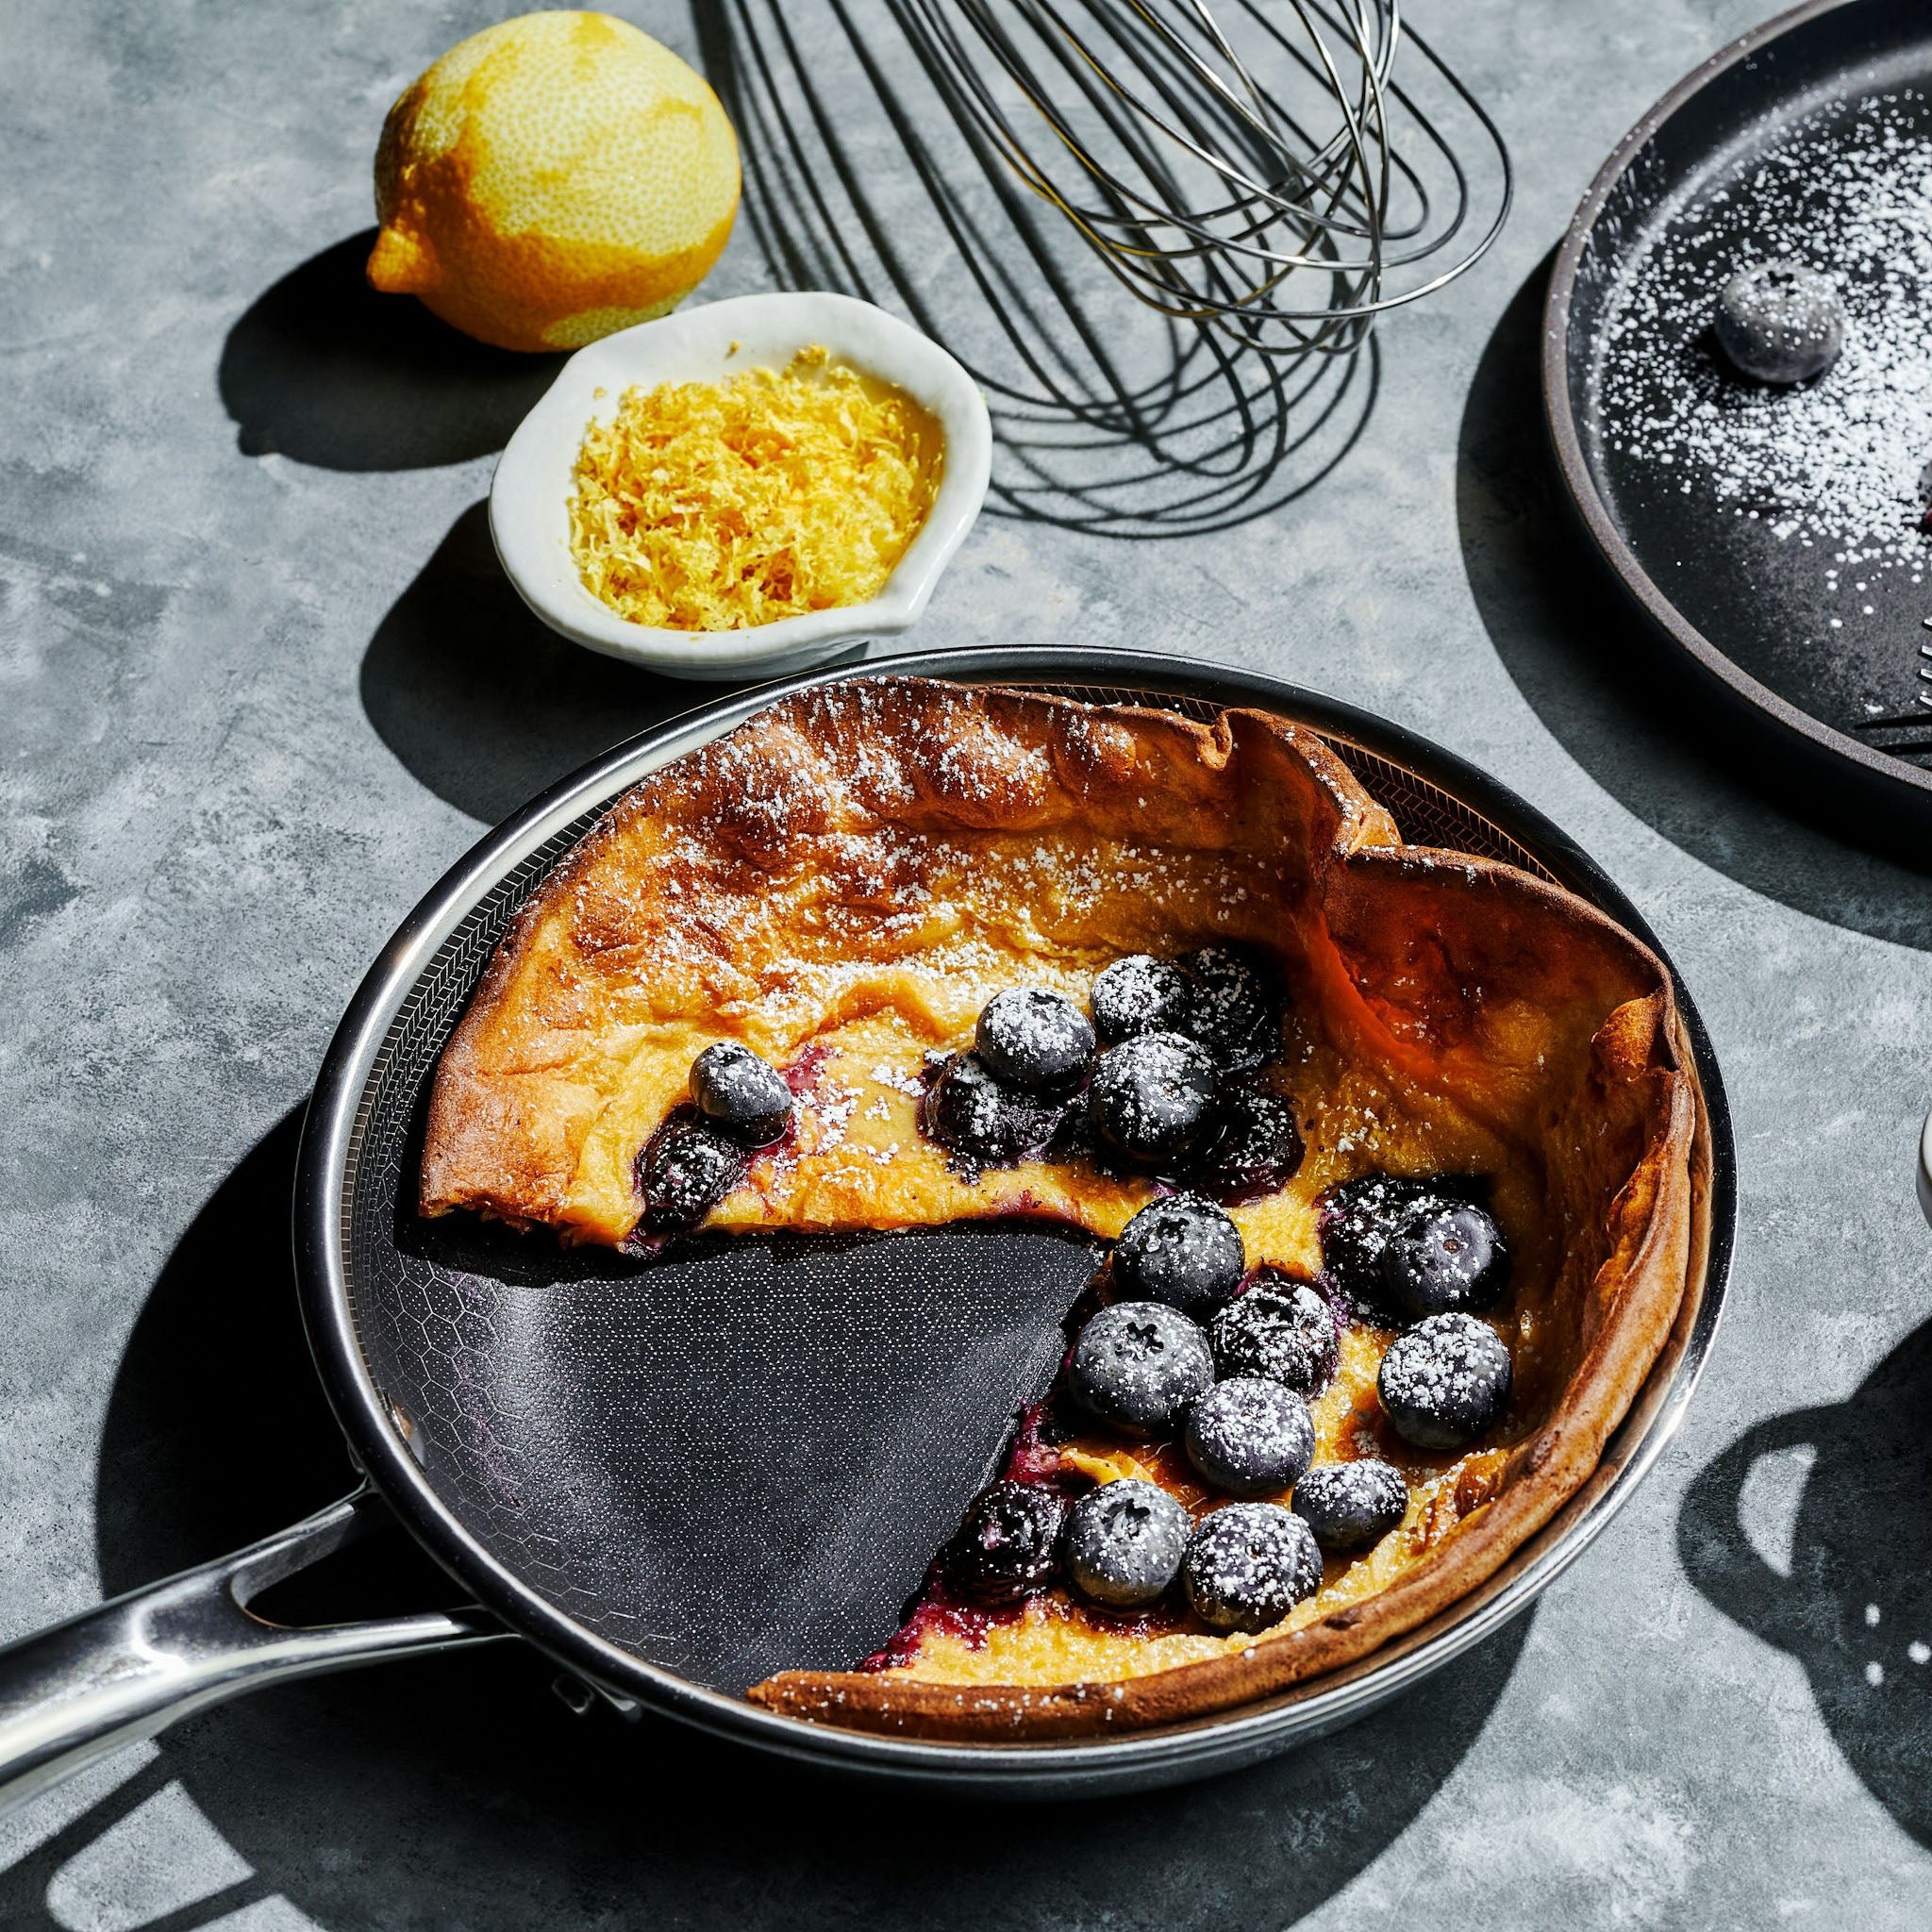 Dutch baby pancake with blueberries, lemon zest, and a whisk on a gray surface.